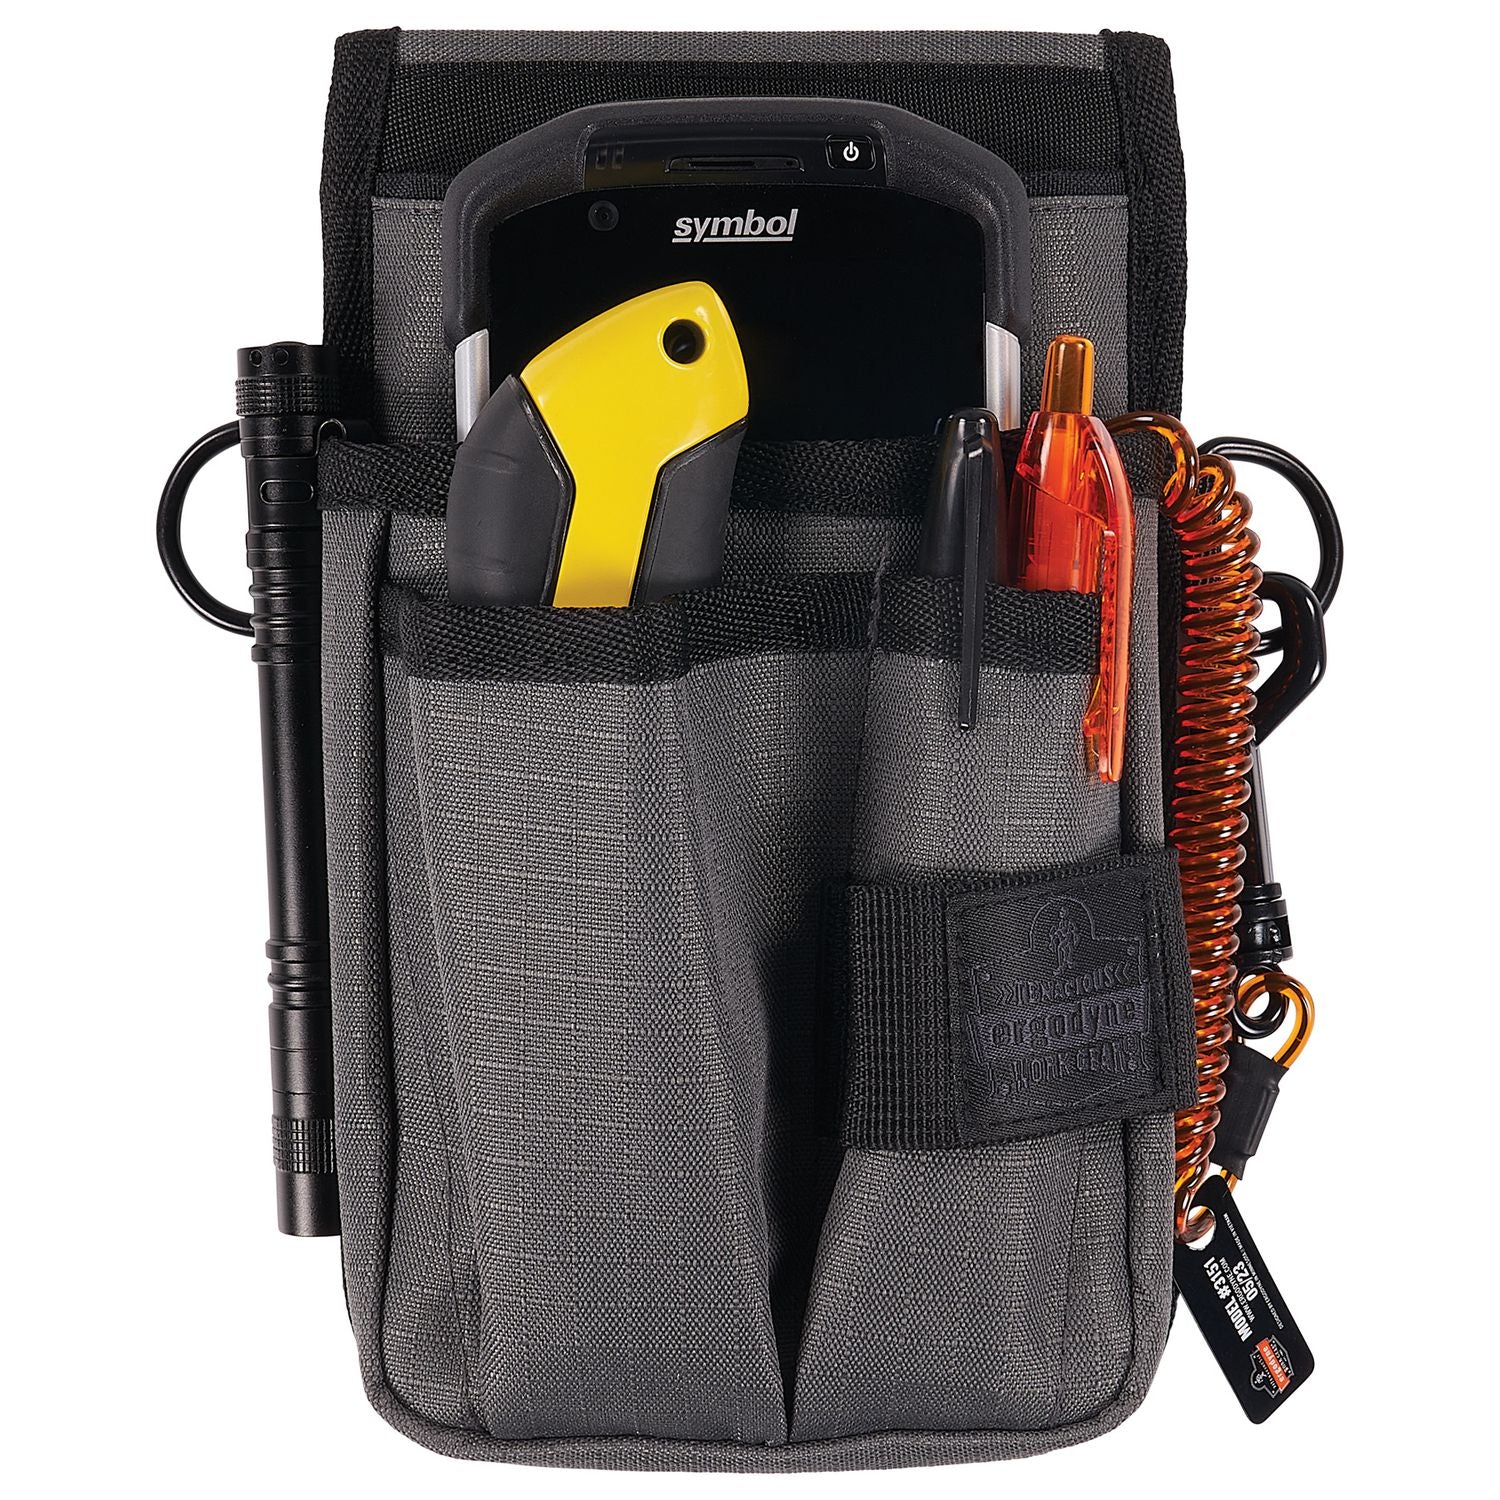 arsenal-5568-belt-loop-tool-pouch-w-device-holster-4-compartments-5-x-2-x-85-polyester-gray-ships-in-1-3-business-days_ego13668 - 3